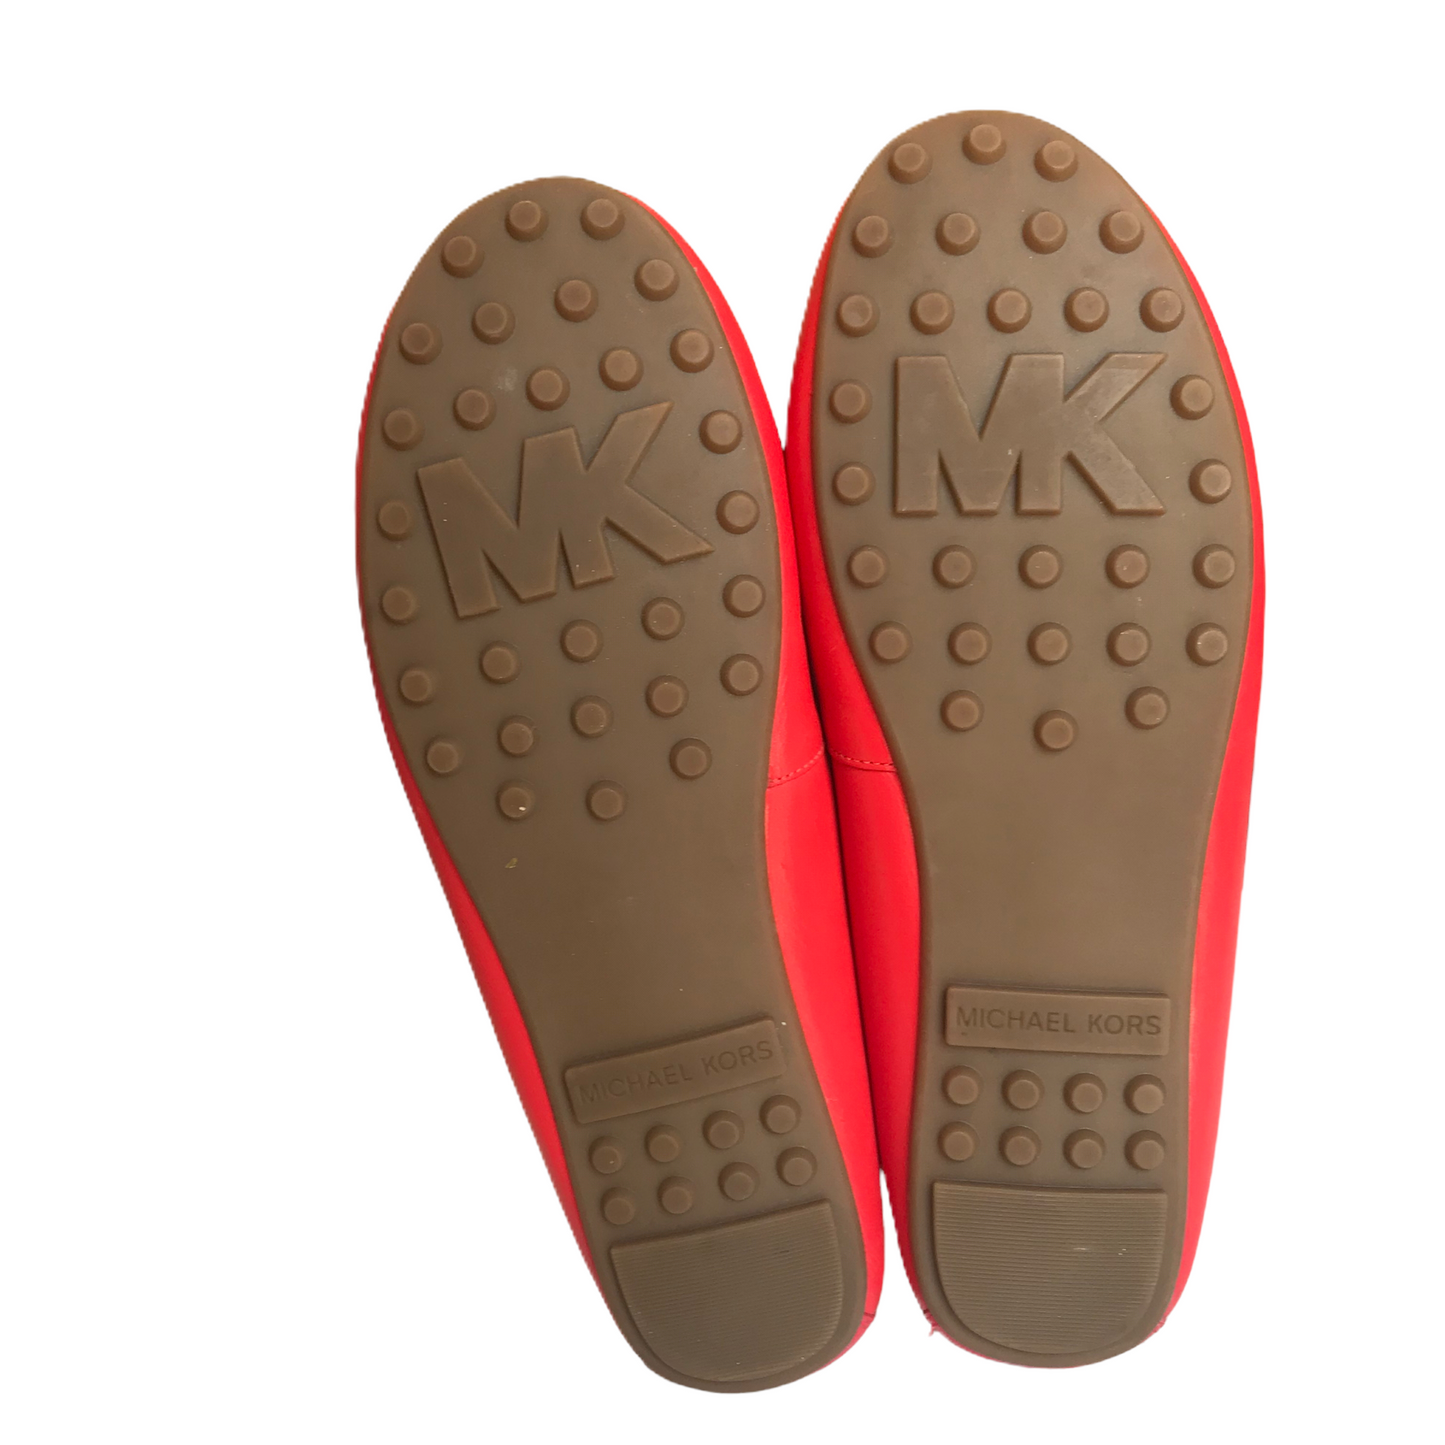 Red Shoes Flats By Michael Kors, Size: 9